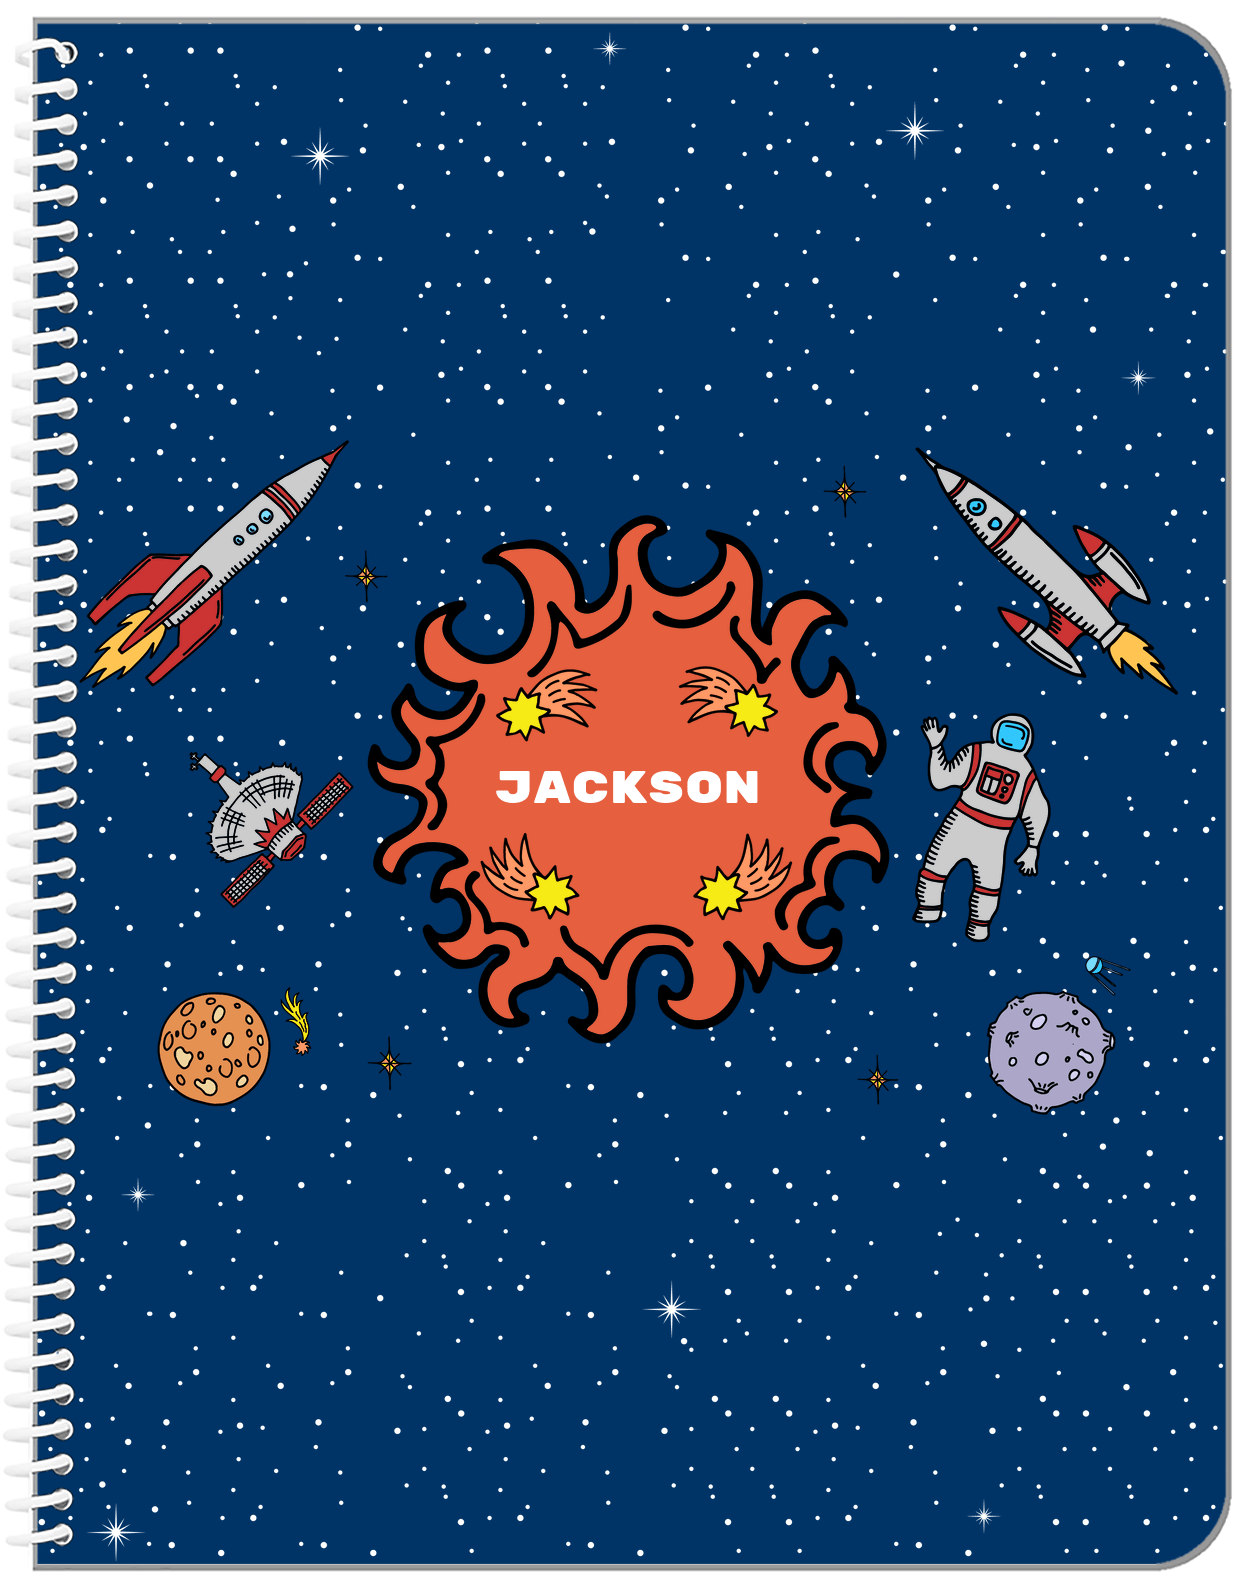 Personalized Rocket Ship Notebook V - Fireball Galaxy - Blue Background - Front View